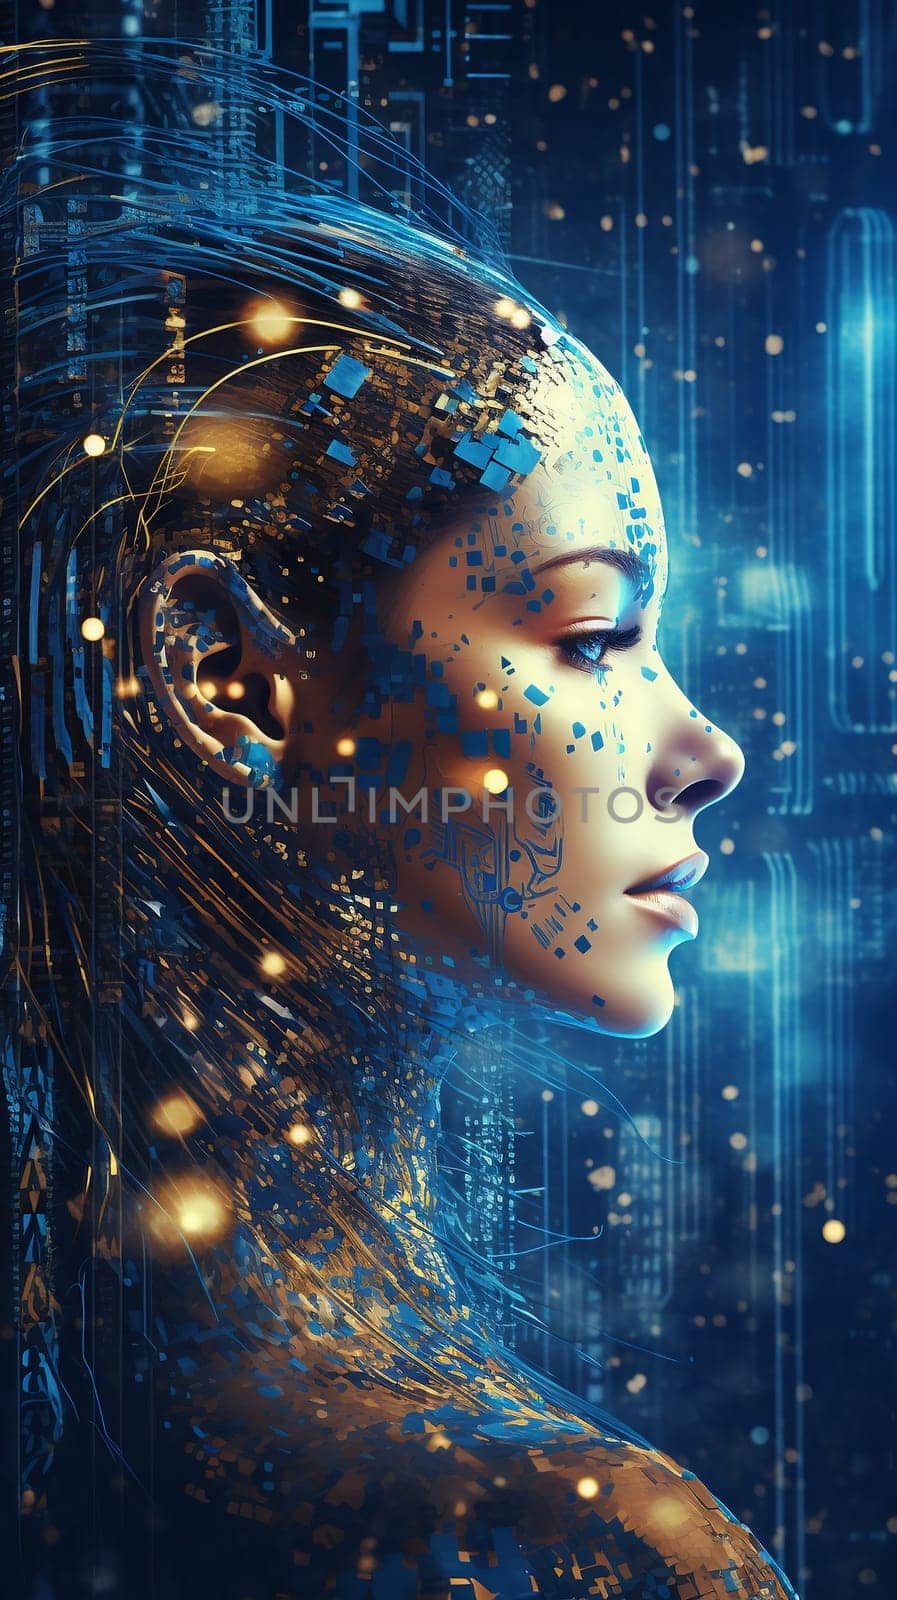 Female android face. Artificial intelligence concept. Futuristic robot head with technology neural system. AI by maclura